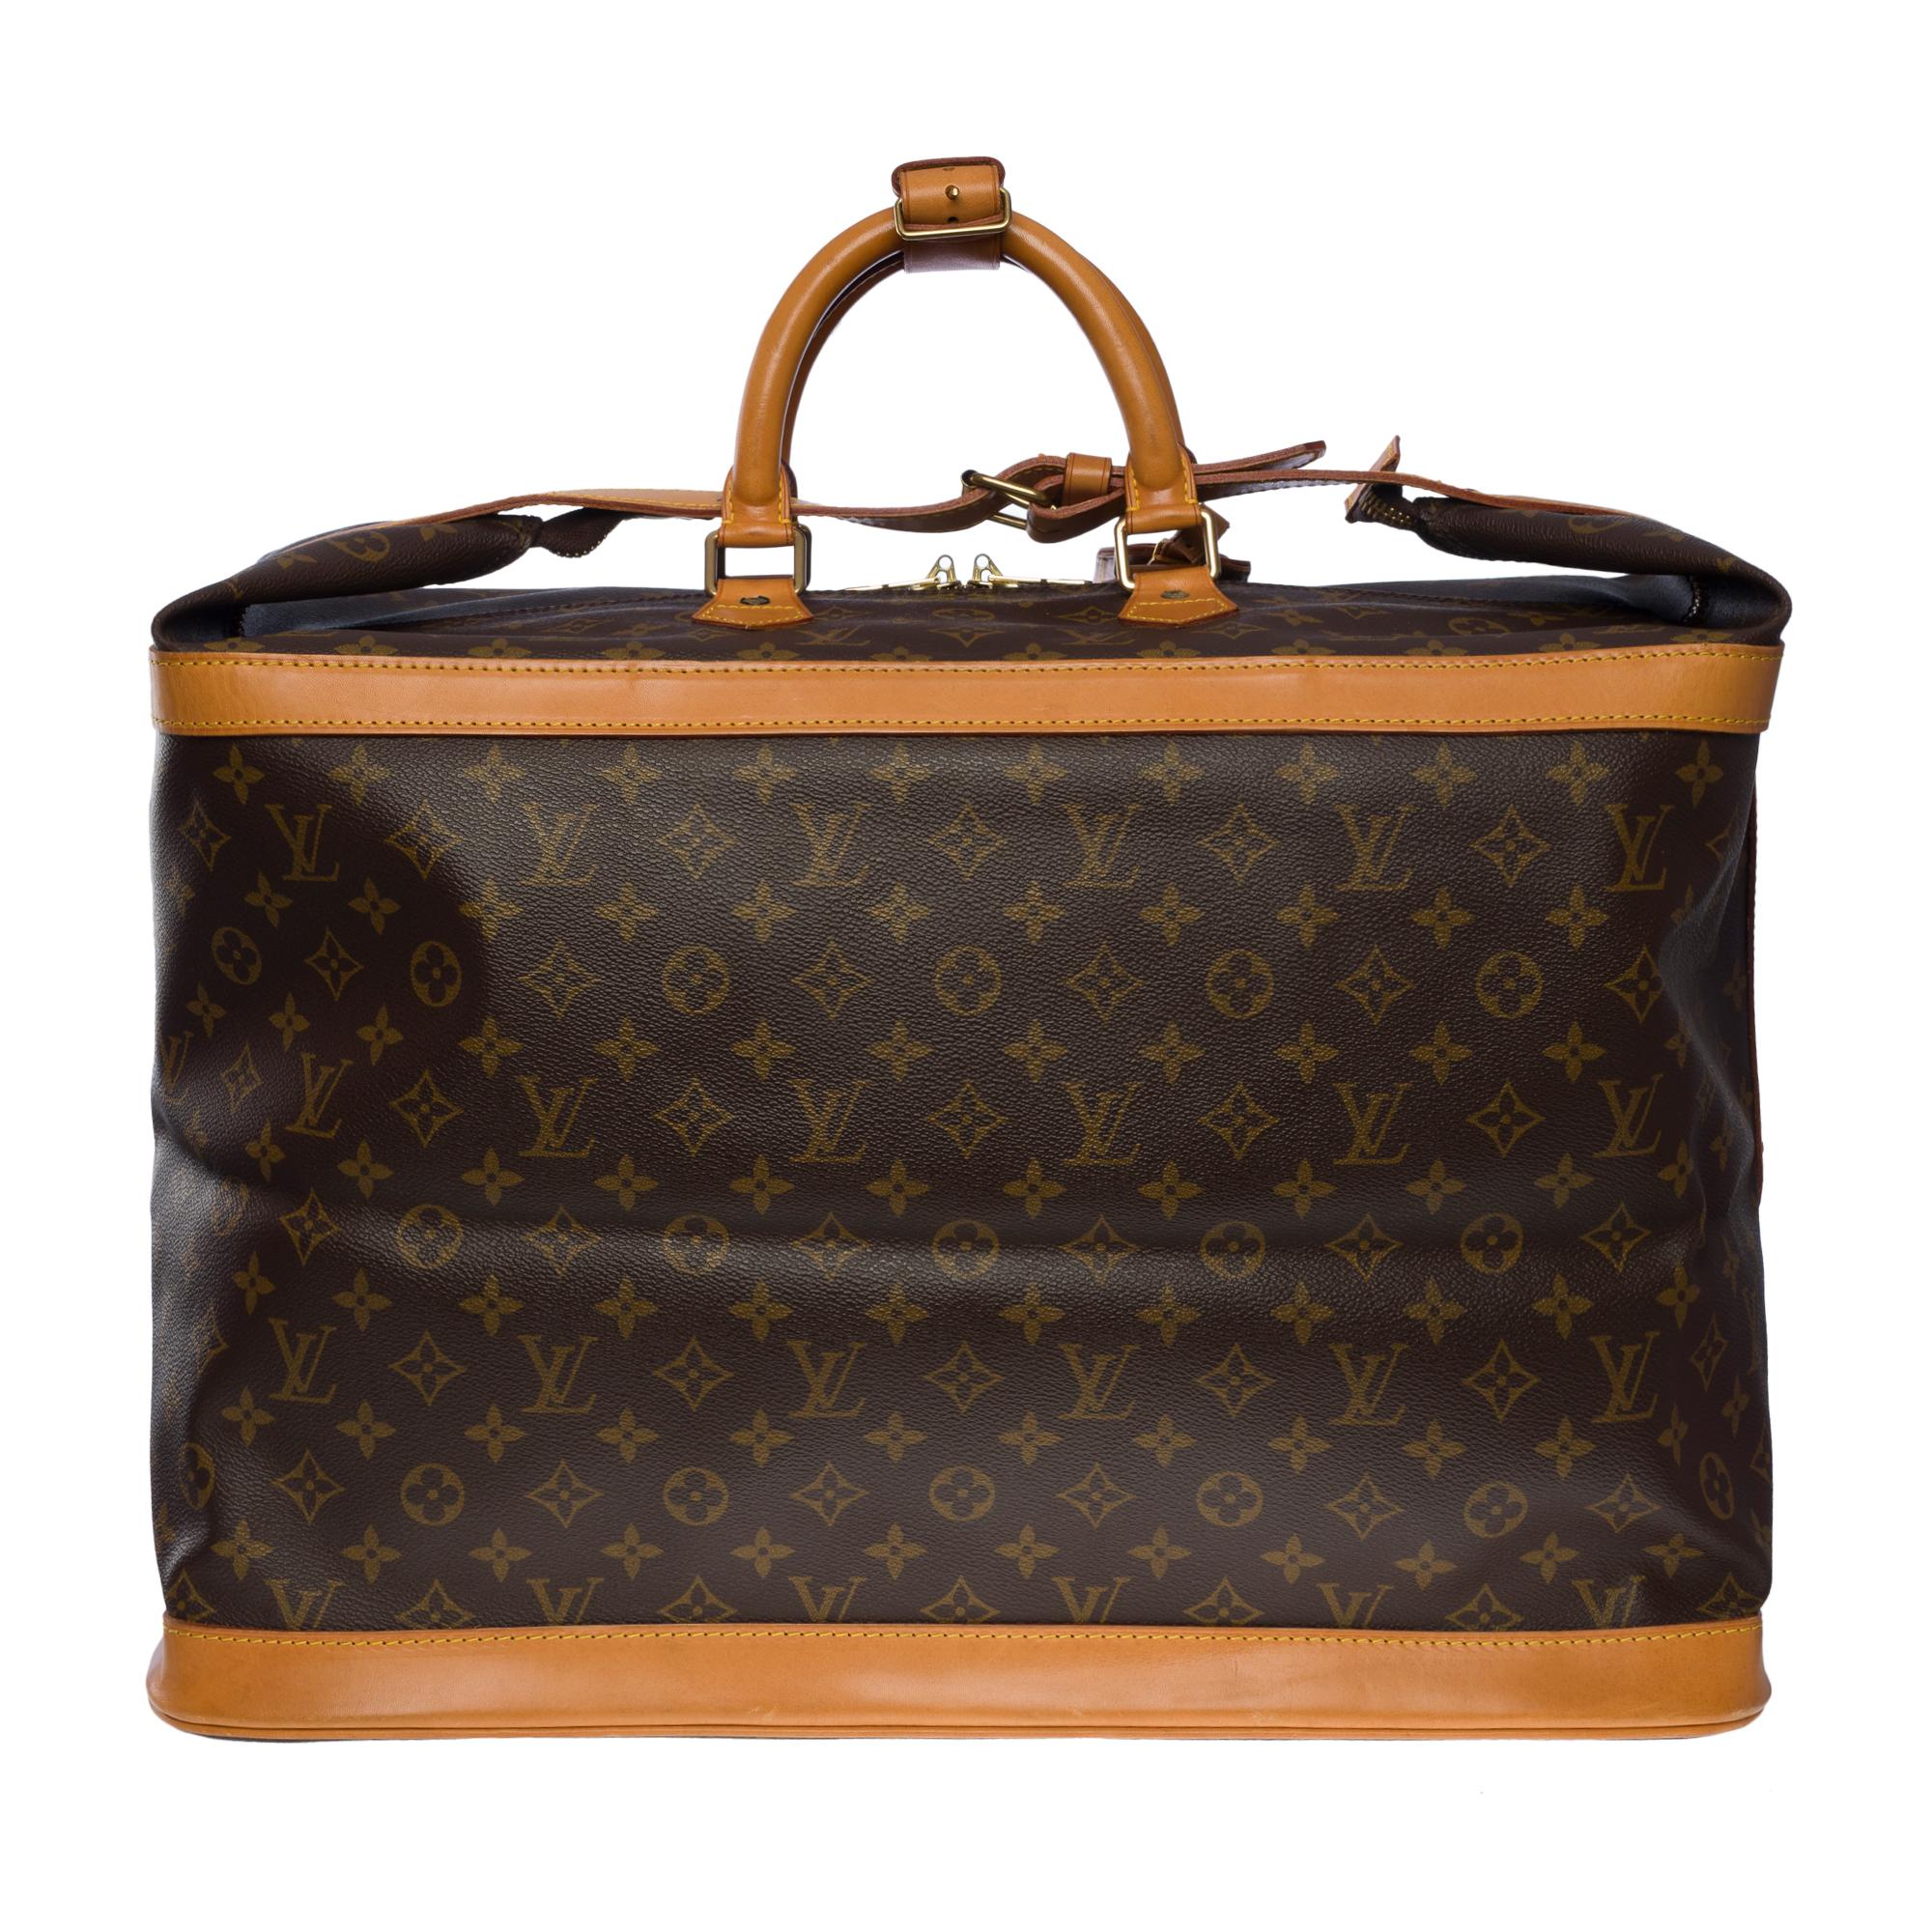 The Spacious Louis Vuitton Cruiser 50 travel bag in monogram coated canvas, gold plated metal hardware
Central zip closure on top and leather strap
Brown leather handles
Brown canvas interior
5 feet of gold metal base
Signature: 